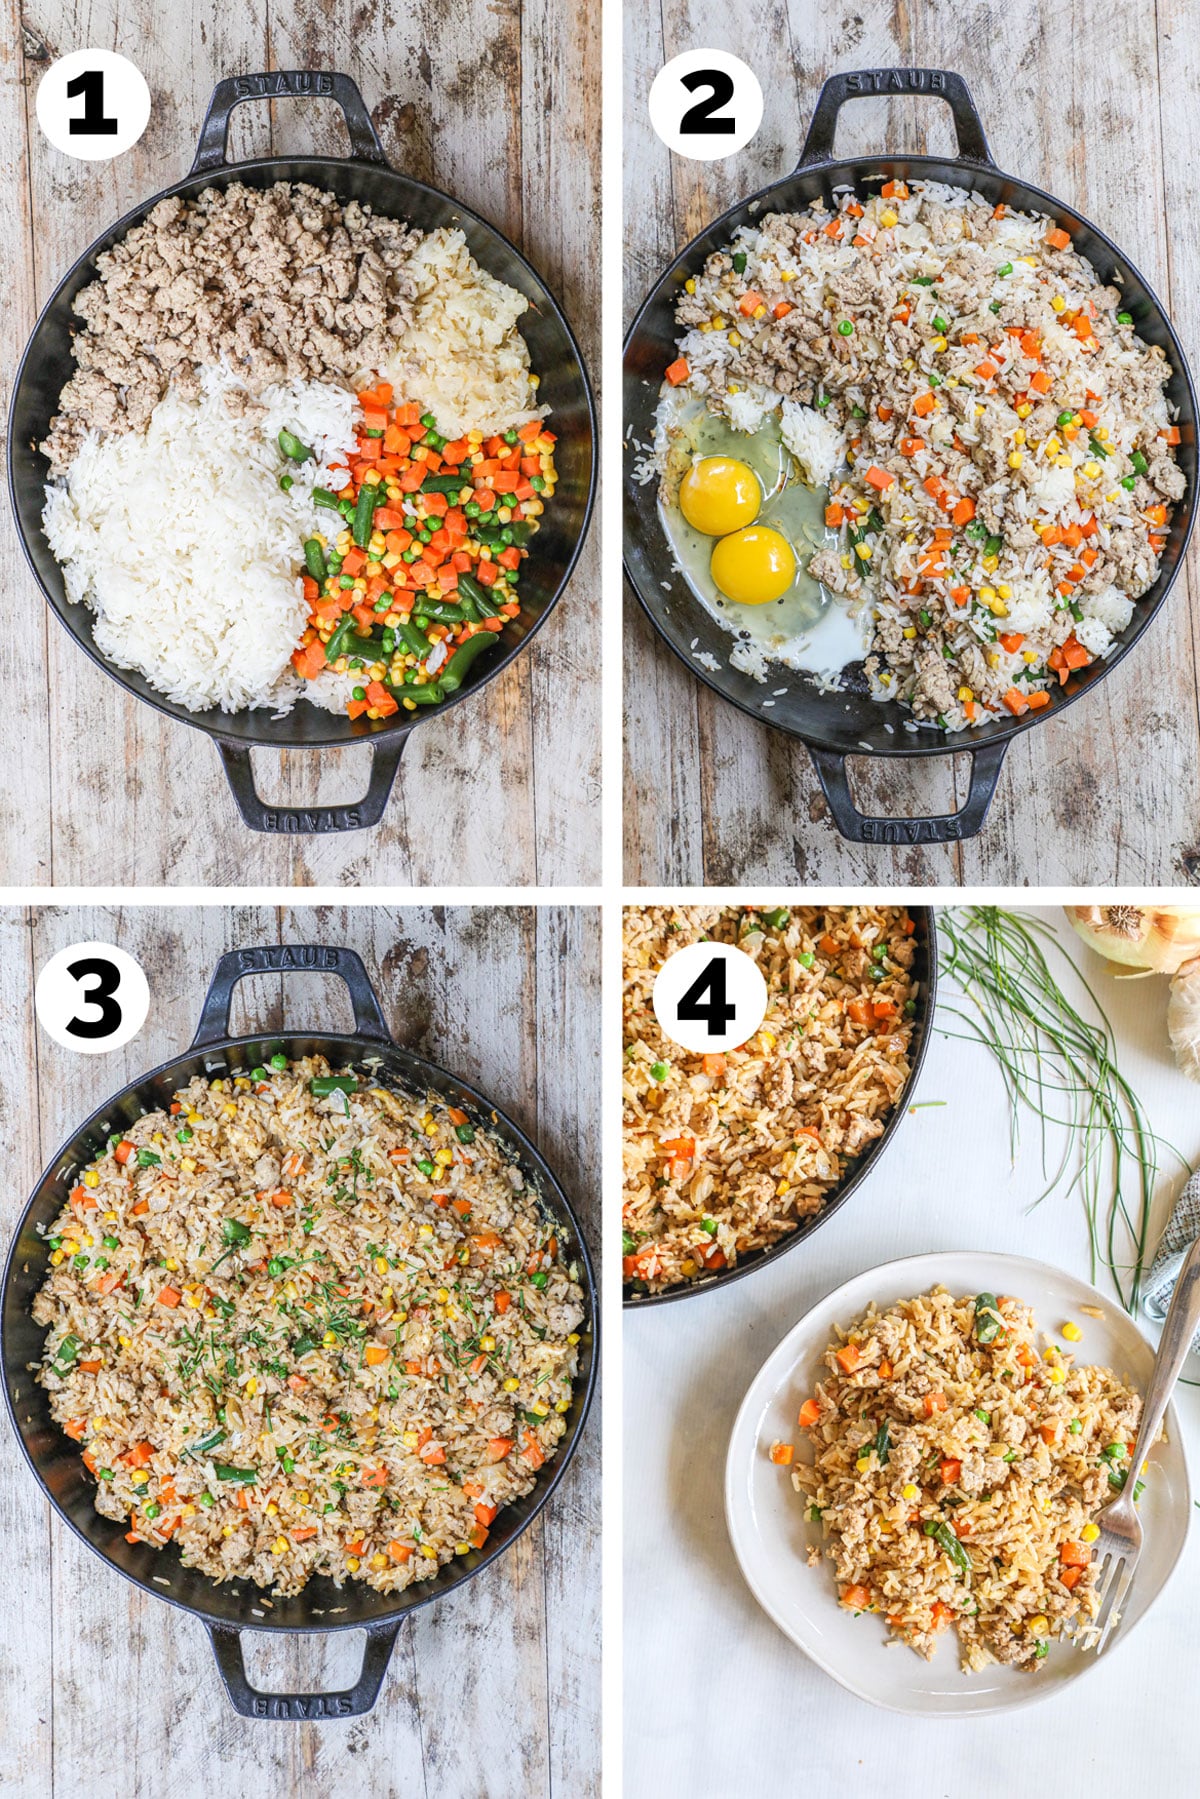 4 image collage making recipe: 1: ingredients in pan before mixing together, 2- after mixed with two eggs added to the side, 3- after fully cooked and combined, 4- recipe served on a small plate next to skillet.